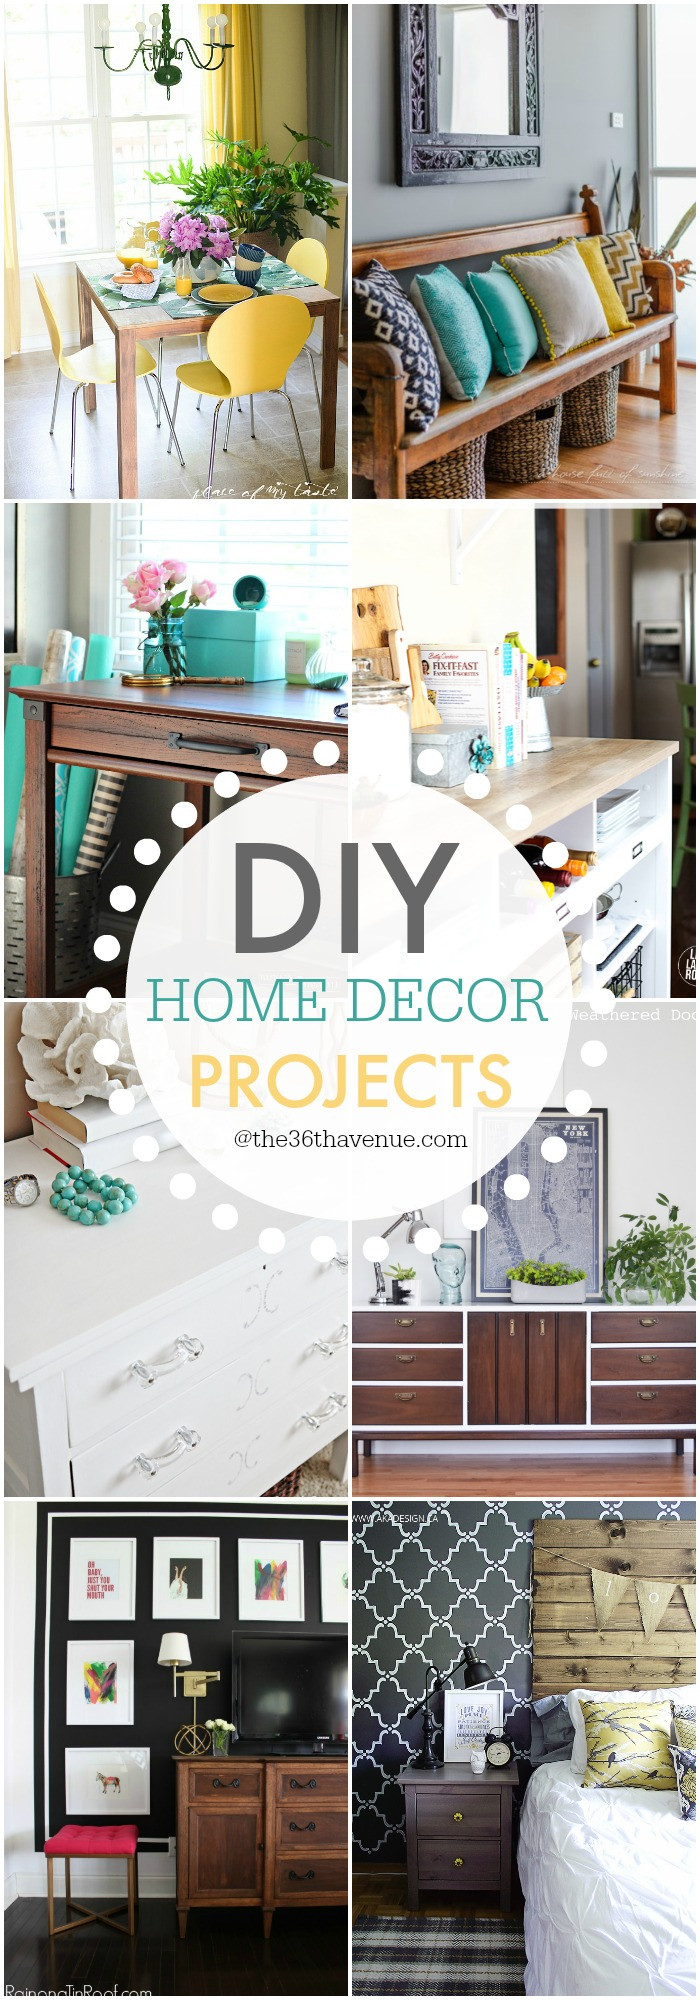 DIY Decorating Projects
 The 36th AVENUE DIY Home Decor Projects and Ideas